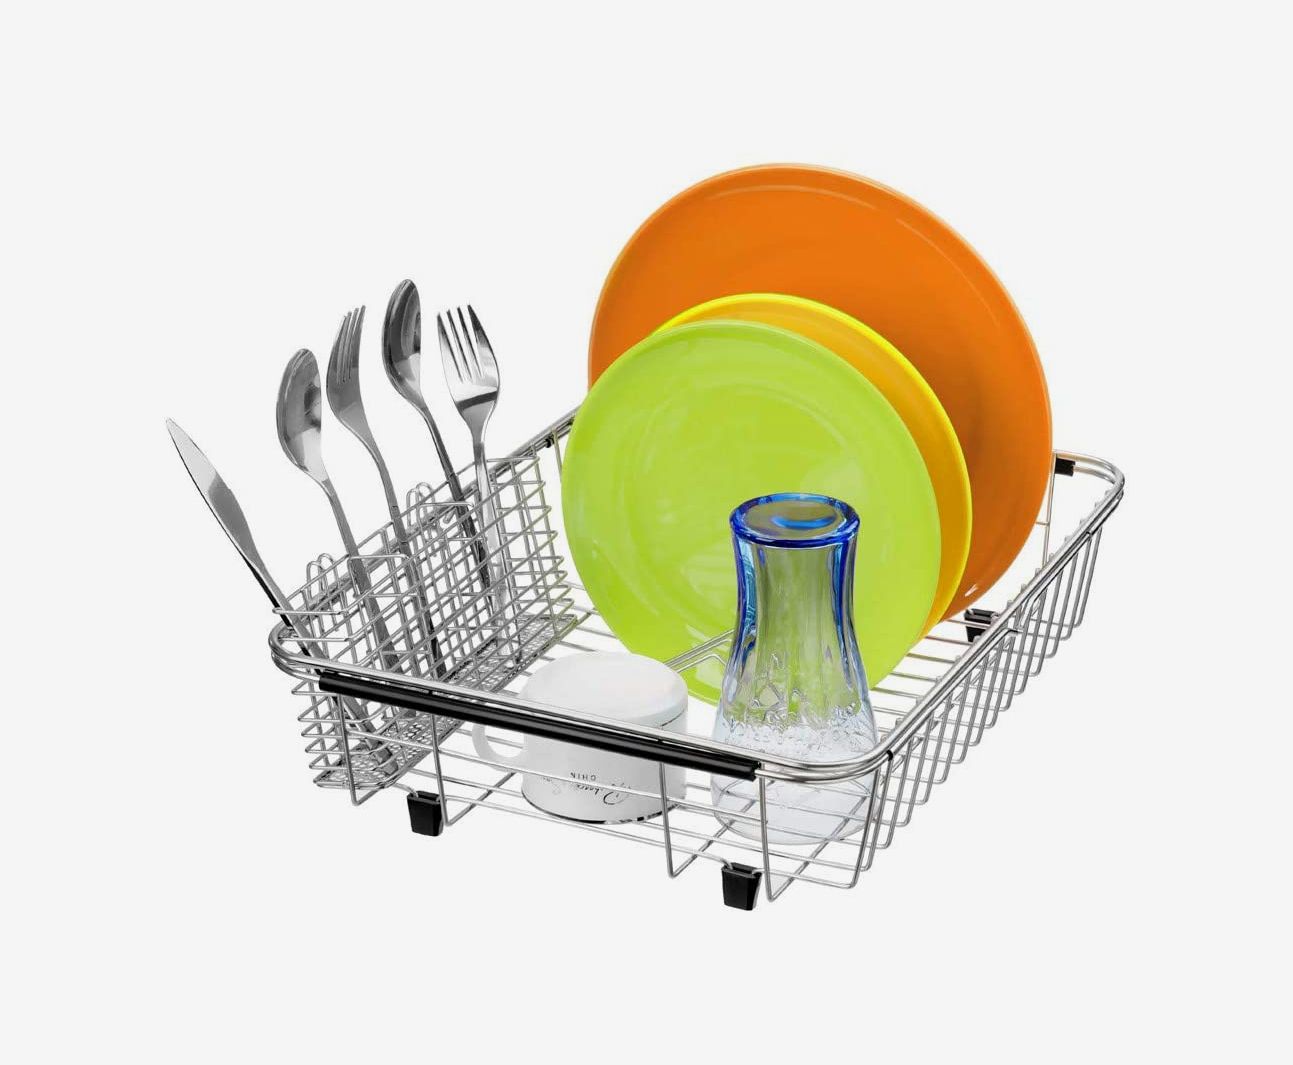 Neat-O Deluxe Chrome-plated Steel Small Dish Drainer Drying Rack Black 